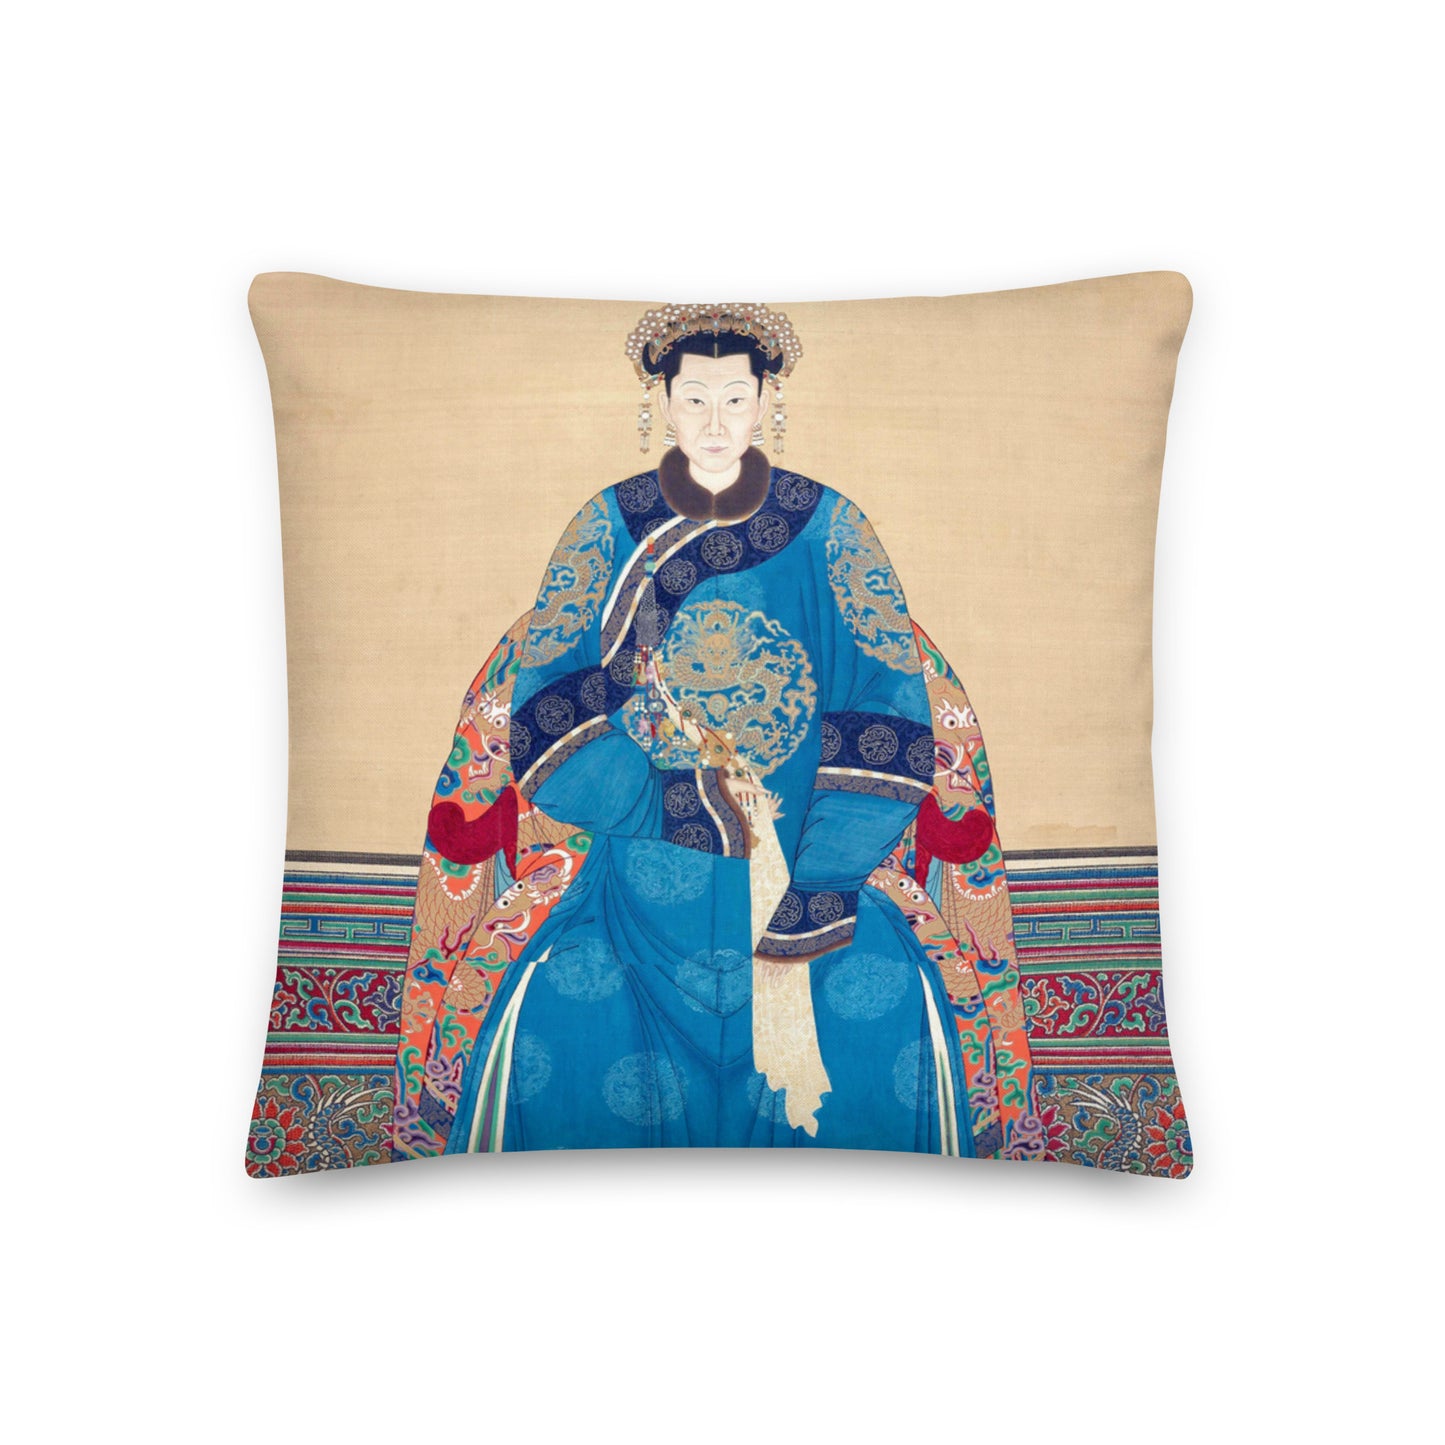 Chinese Imperial lady with stunning detail decorates this cushions cove